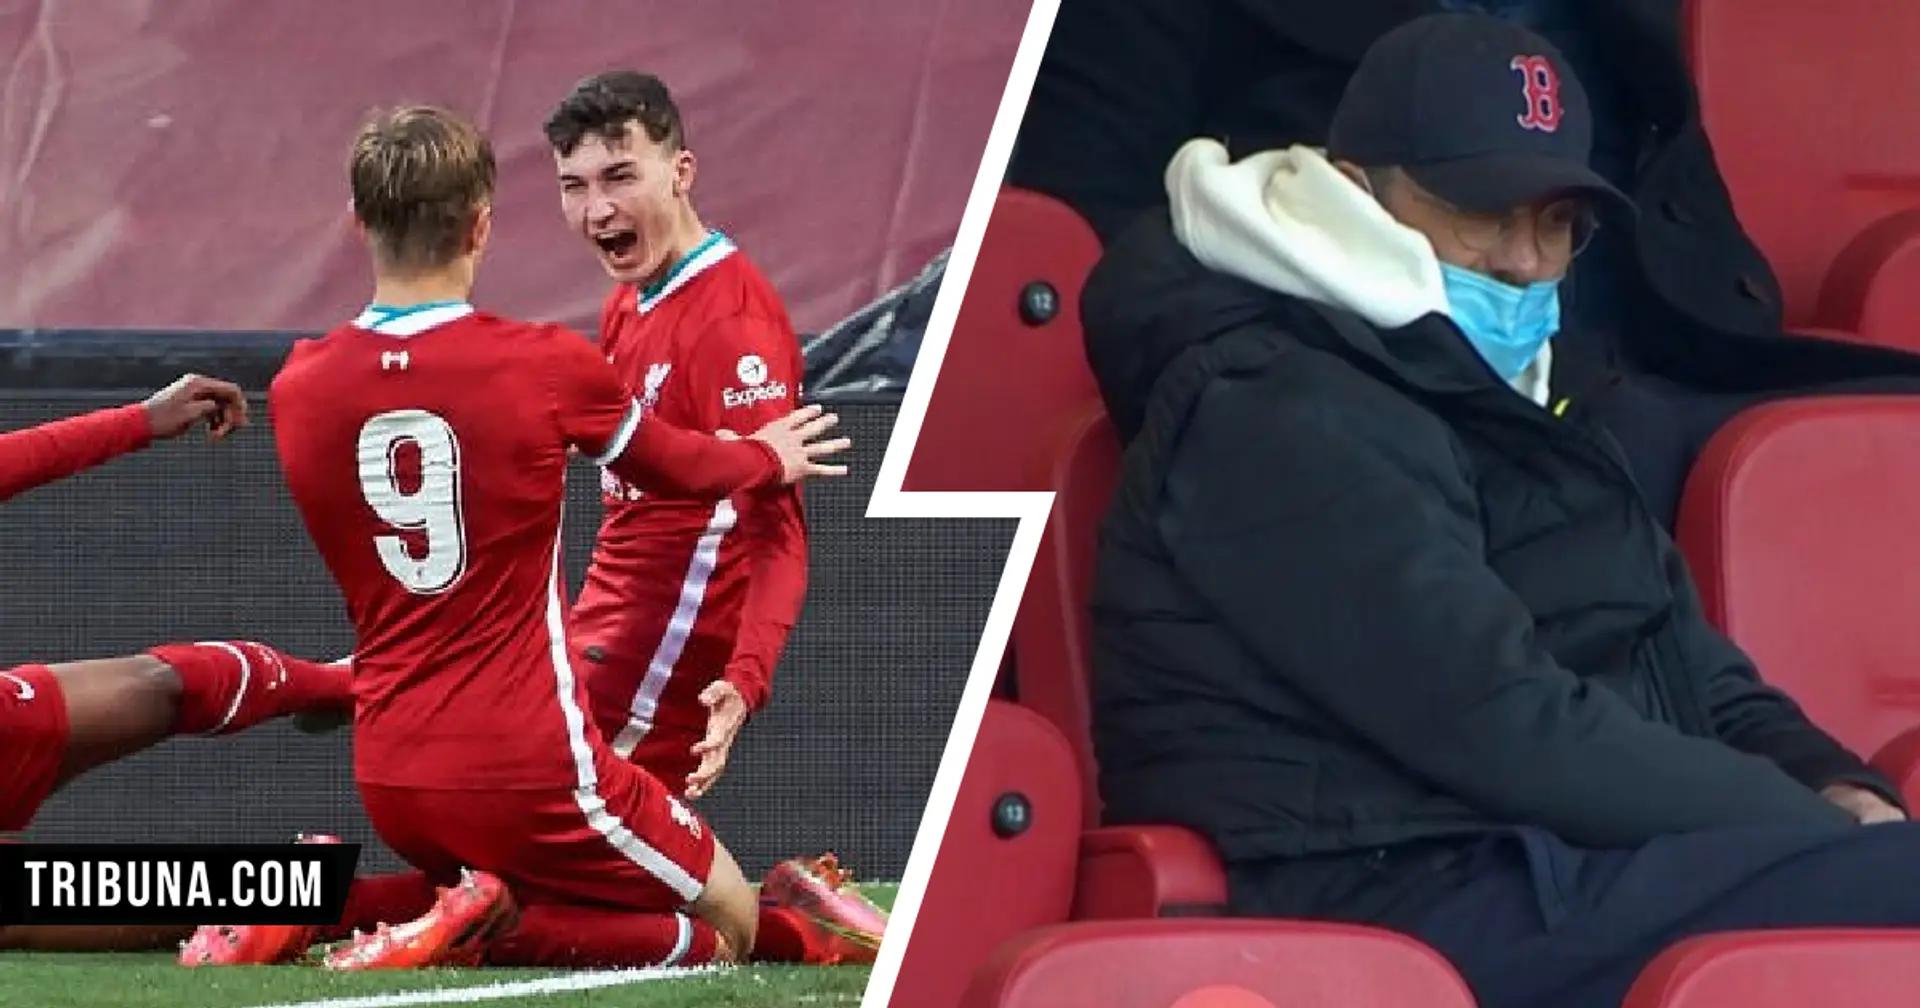 Jurgen Klopp spotted in stands as Liverpool U18s impress with 3-1 win over Arsenal